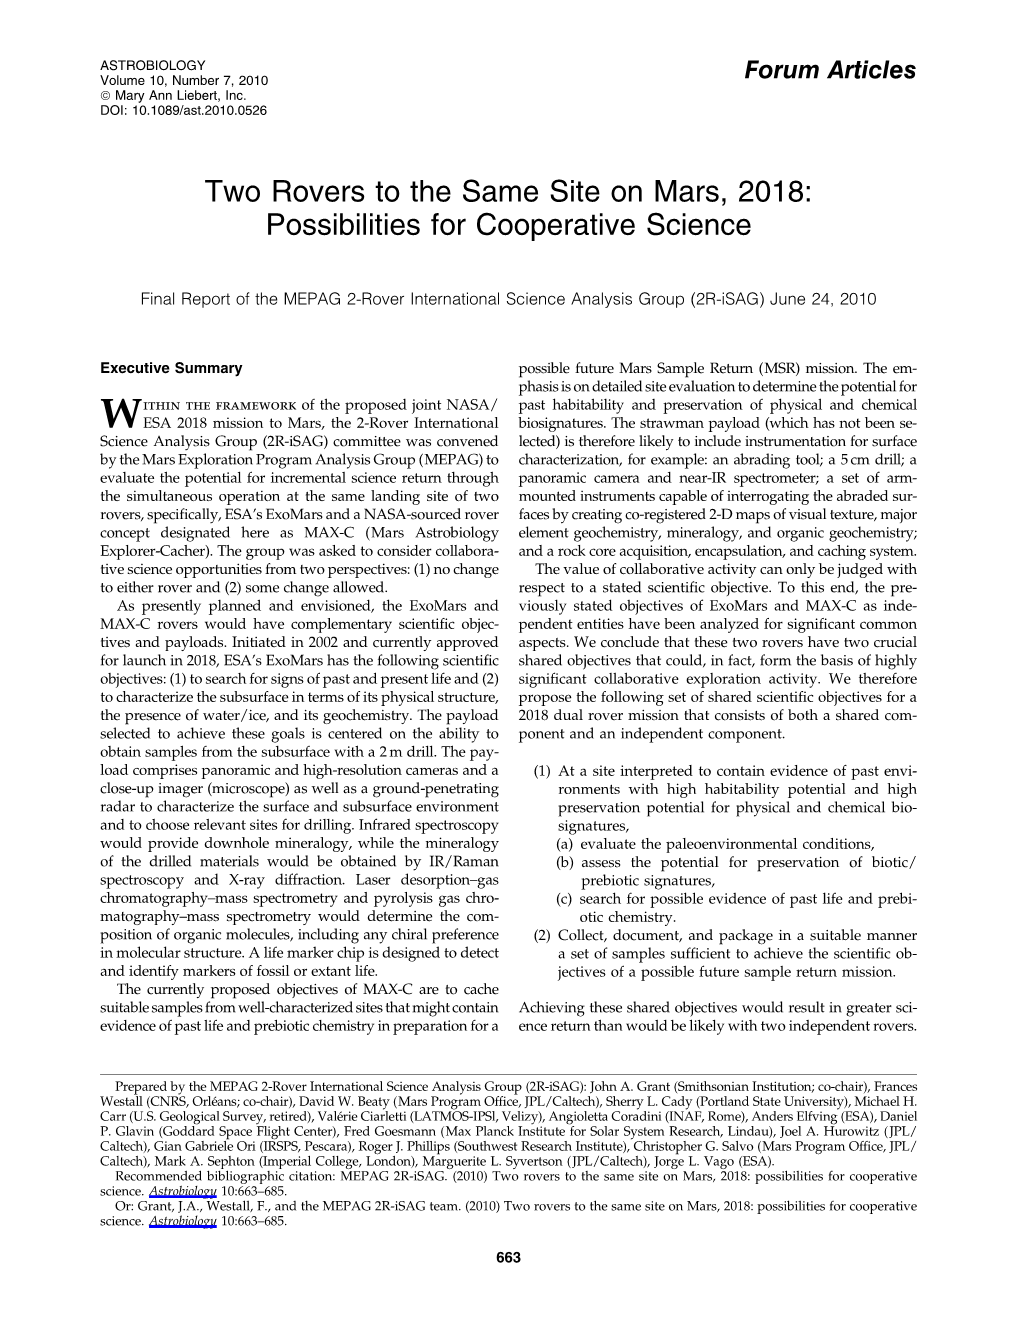 Two Rovers to the Same Site on Mars, 2018: Possibilities for Cooperative Science